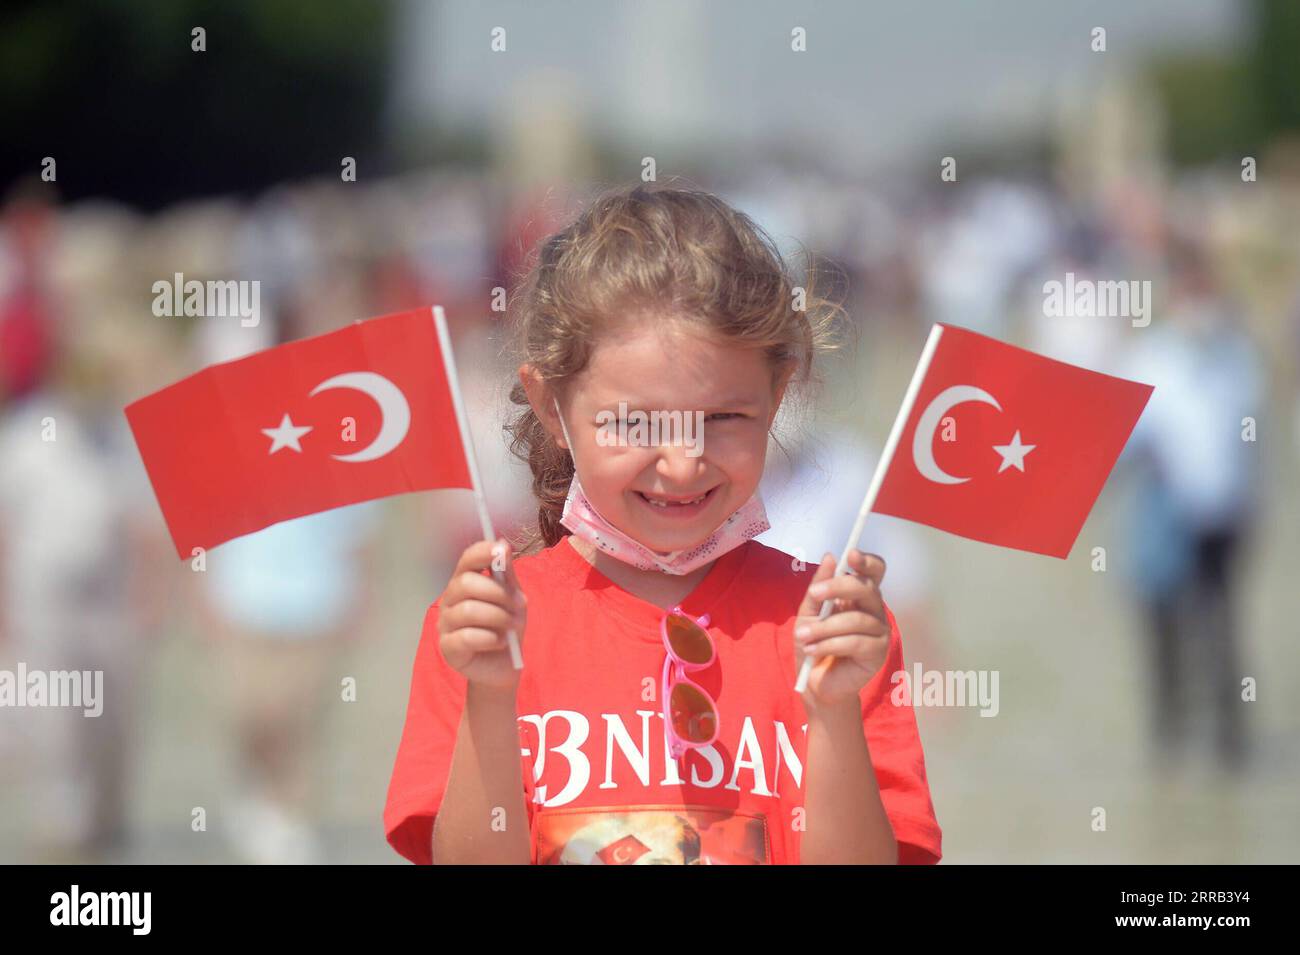 210831 -- ANKARA, Aug. 31, 2021 -- A child celebrates the 99th Anniversary of Turkey s Victory Day at the Ataturk Mausoleum in Ankara, Turkey, on Aug. 30, 2021. Turkey on Monday celebrated the 99th anniversary of Victory Day, the day the Turks defeated the Greek forces at the Battle of Dumlupinar, the final battle of the Turkish War of Independence in 1922. Photo by /Xinhua TURKEY-ANKARA-VICTORY DAY-ANNIVERSARY MustafaxKaya PUBLICATIONxNOTxINxCHN Stock Photo